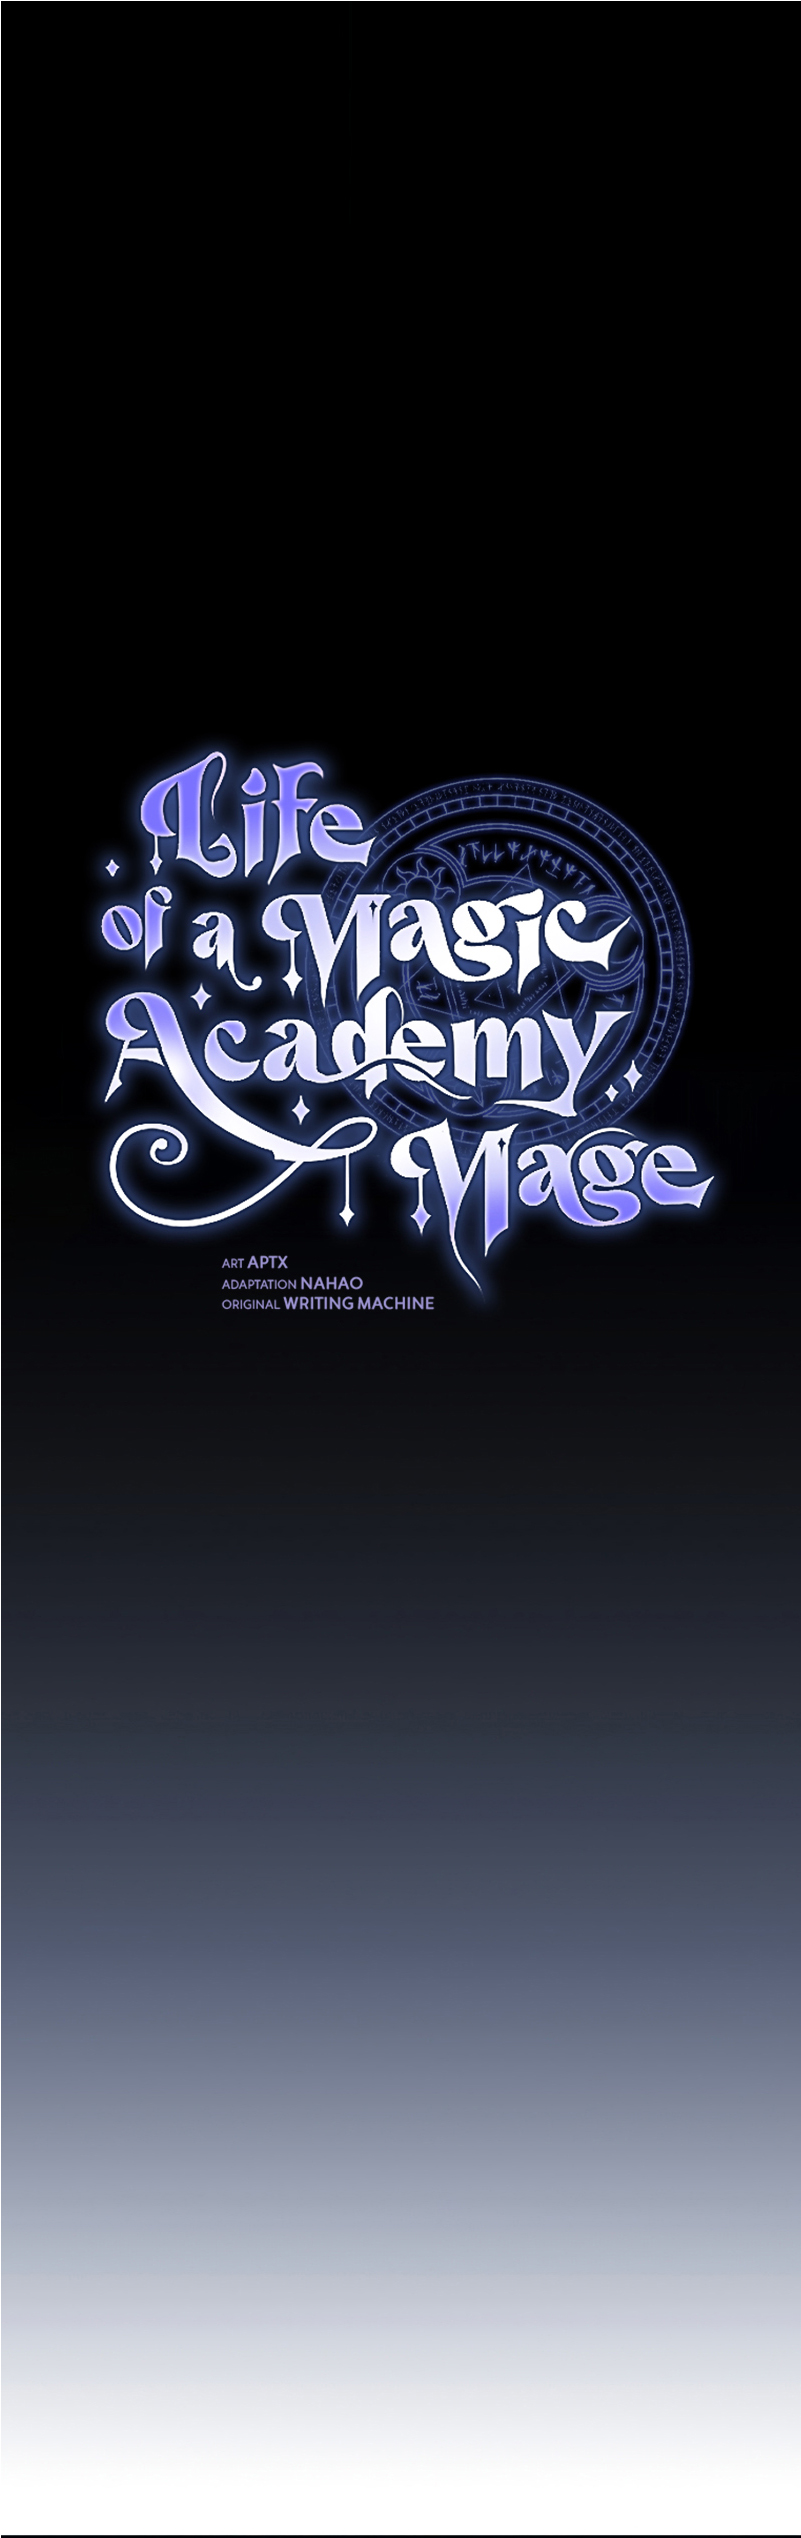 Life of a Magic Academy Mage 64 (1)